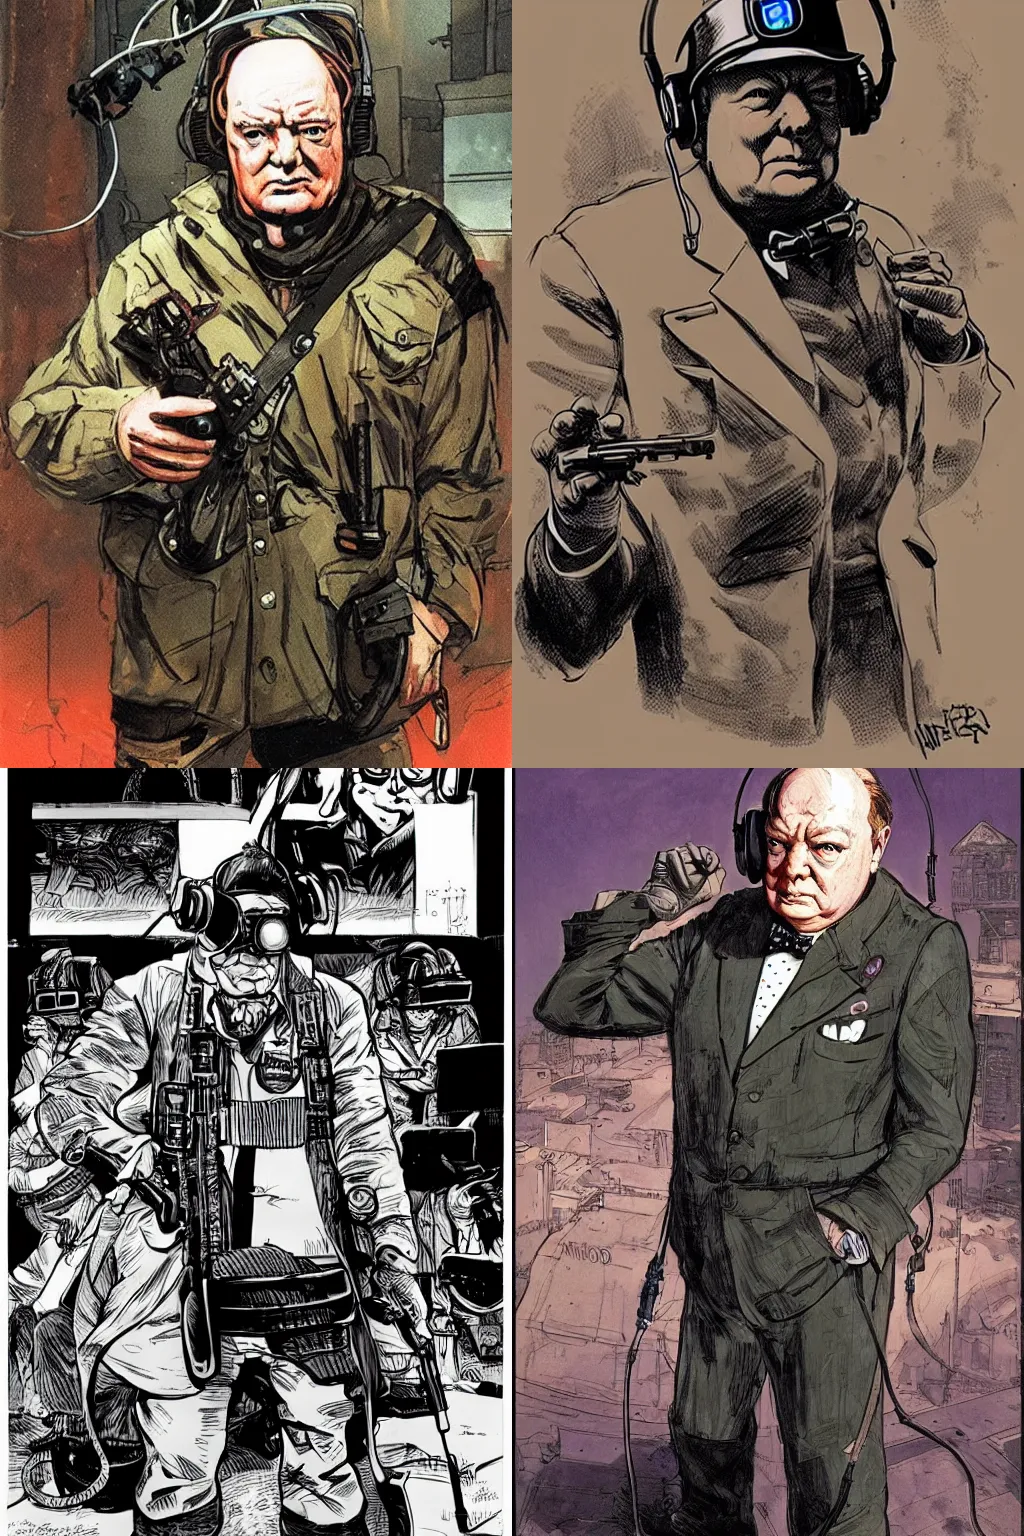 Prompt: Winston Churchill as a cyberpunk mercenary wearing a cyberpunk headset and military gear. In style of moebius.